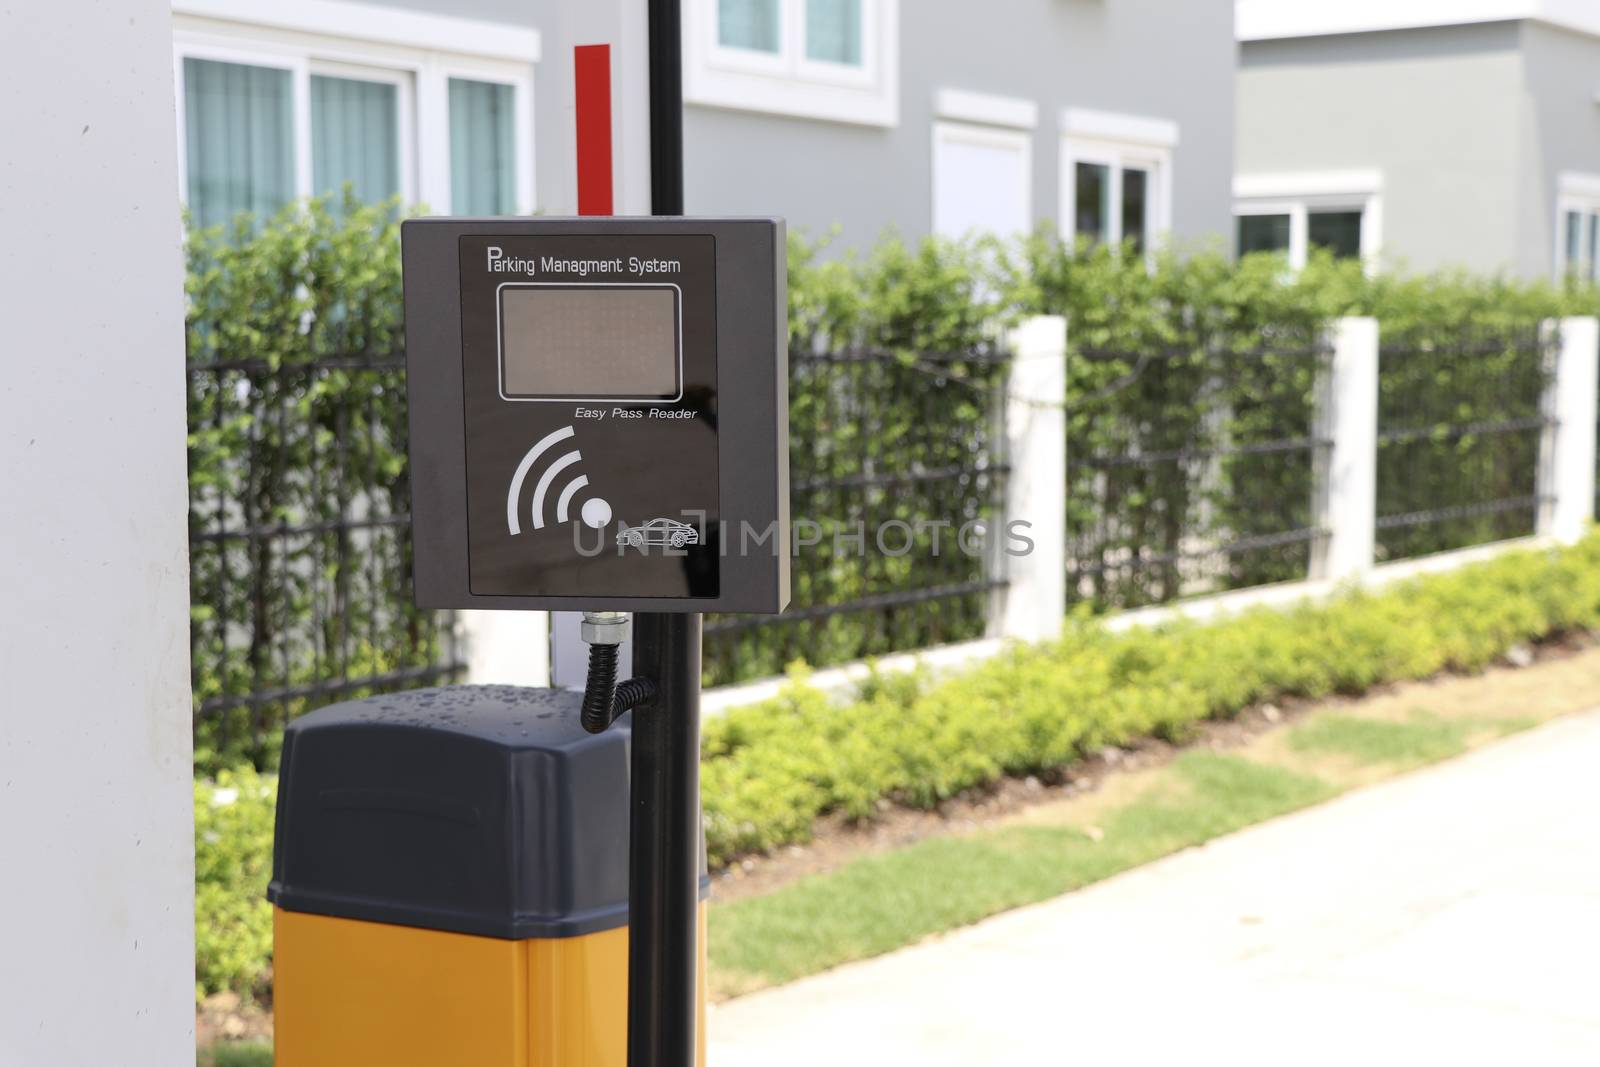 Access control of vehicles for entry and exit for safety and privacy.